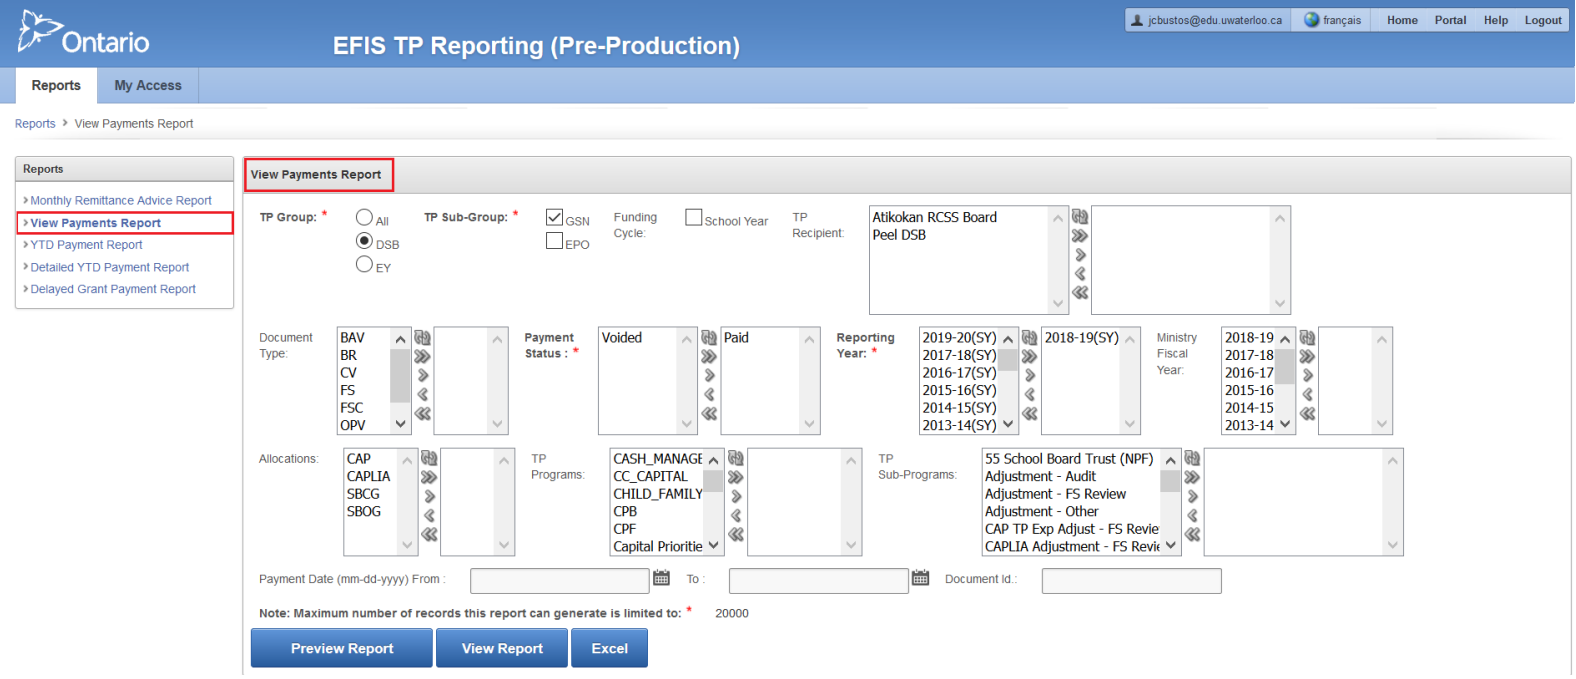 EFIS TP Reporting (Pre-Production): Generating Reports